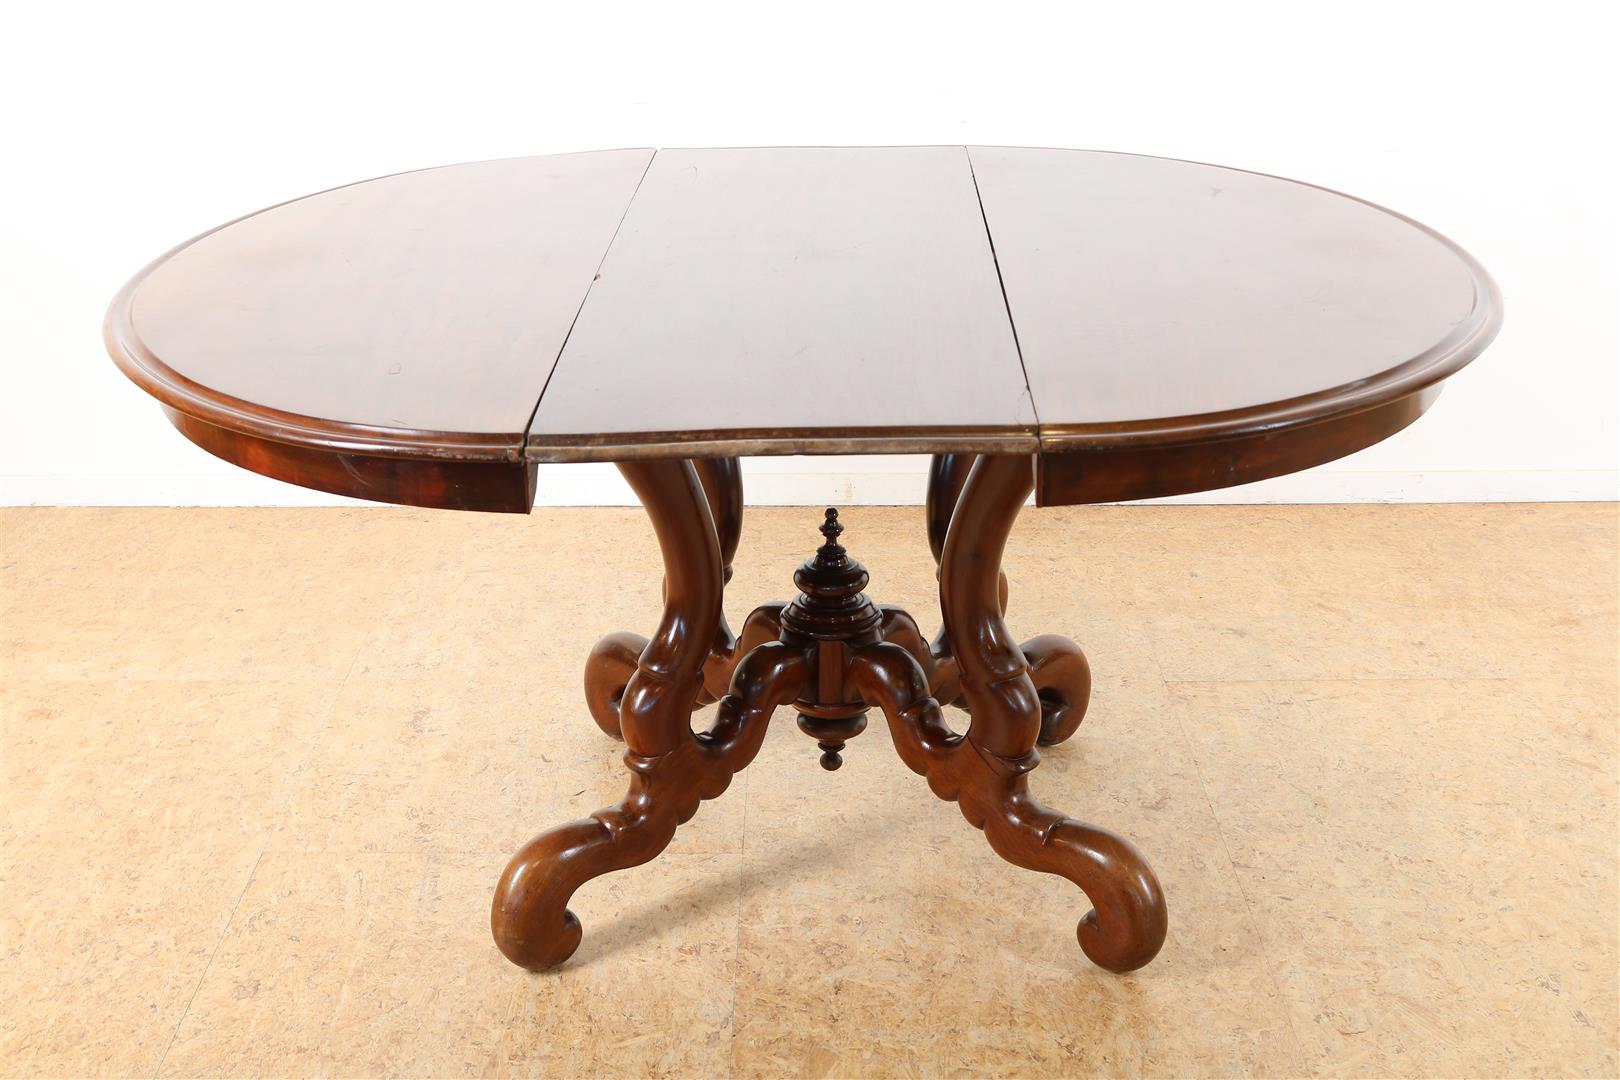 Mahogany Biedermeier coulisse table on spider head leg, 19 century, 74 x 135 x 108 cm, with - Image 5 of 7